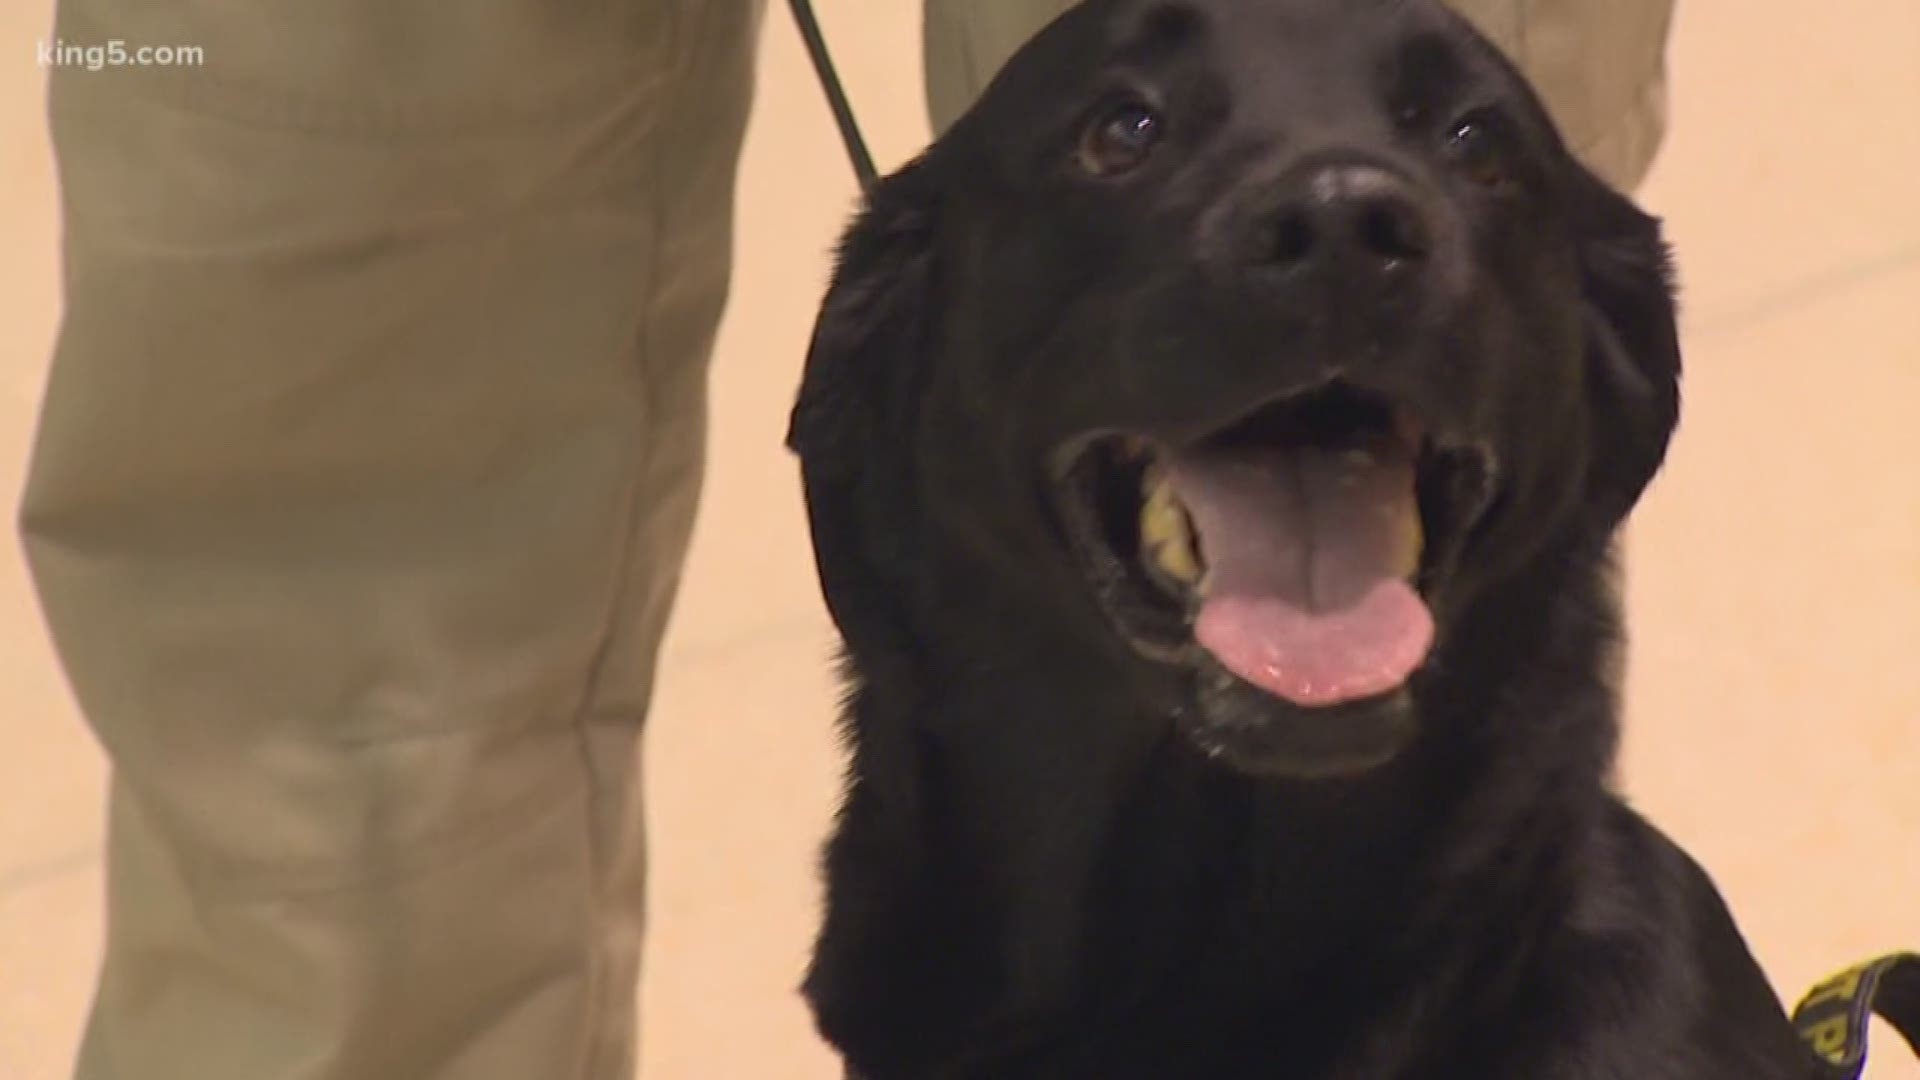 Bela, an explosive detection canine, has worked at Sea-Tac Airport since 2014.